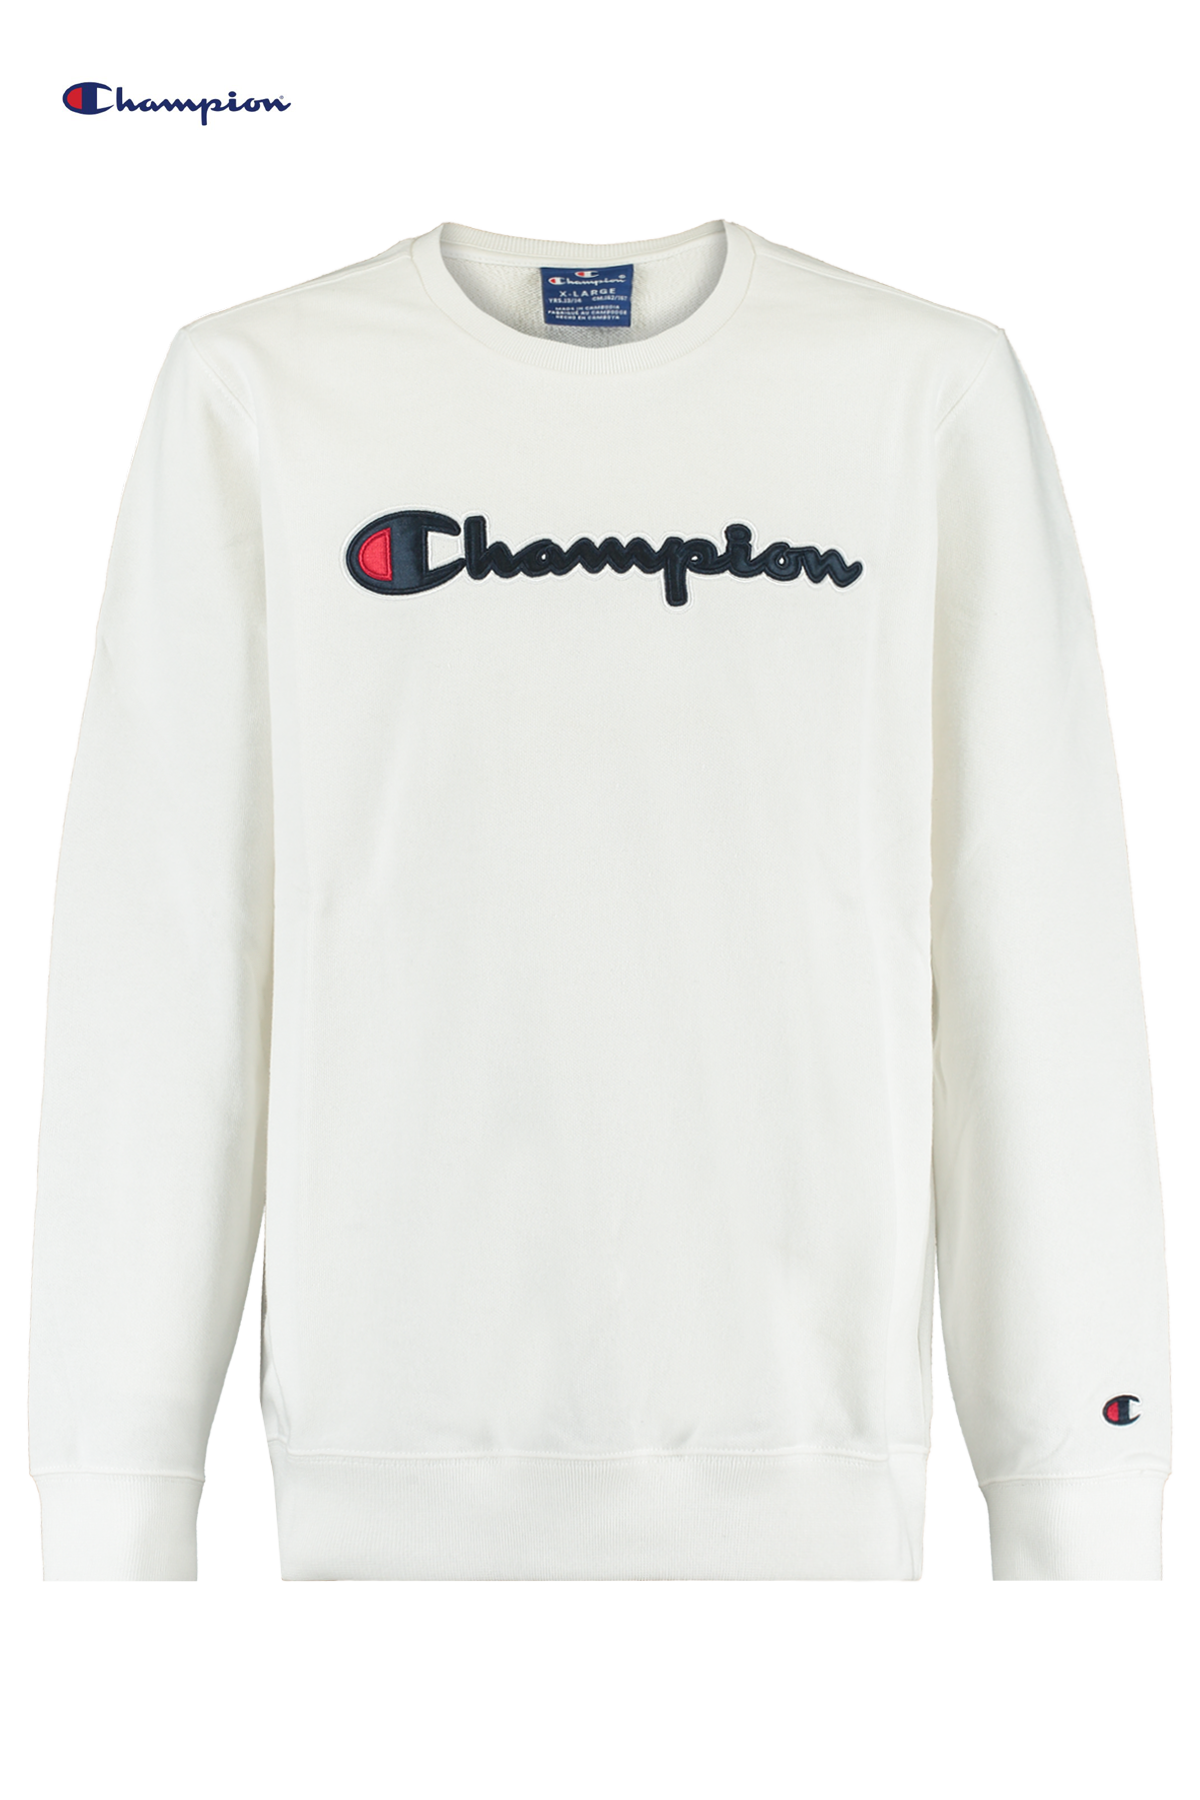 Beugel Academie Mangel White Sweater Champion Clearance, SAVE 32% - icarus.photos